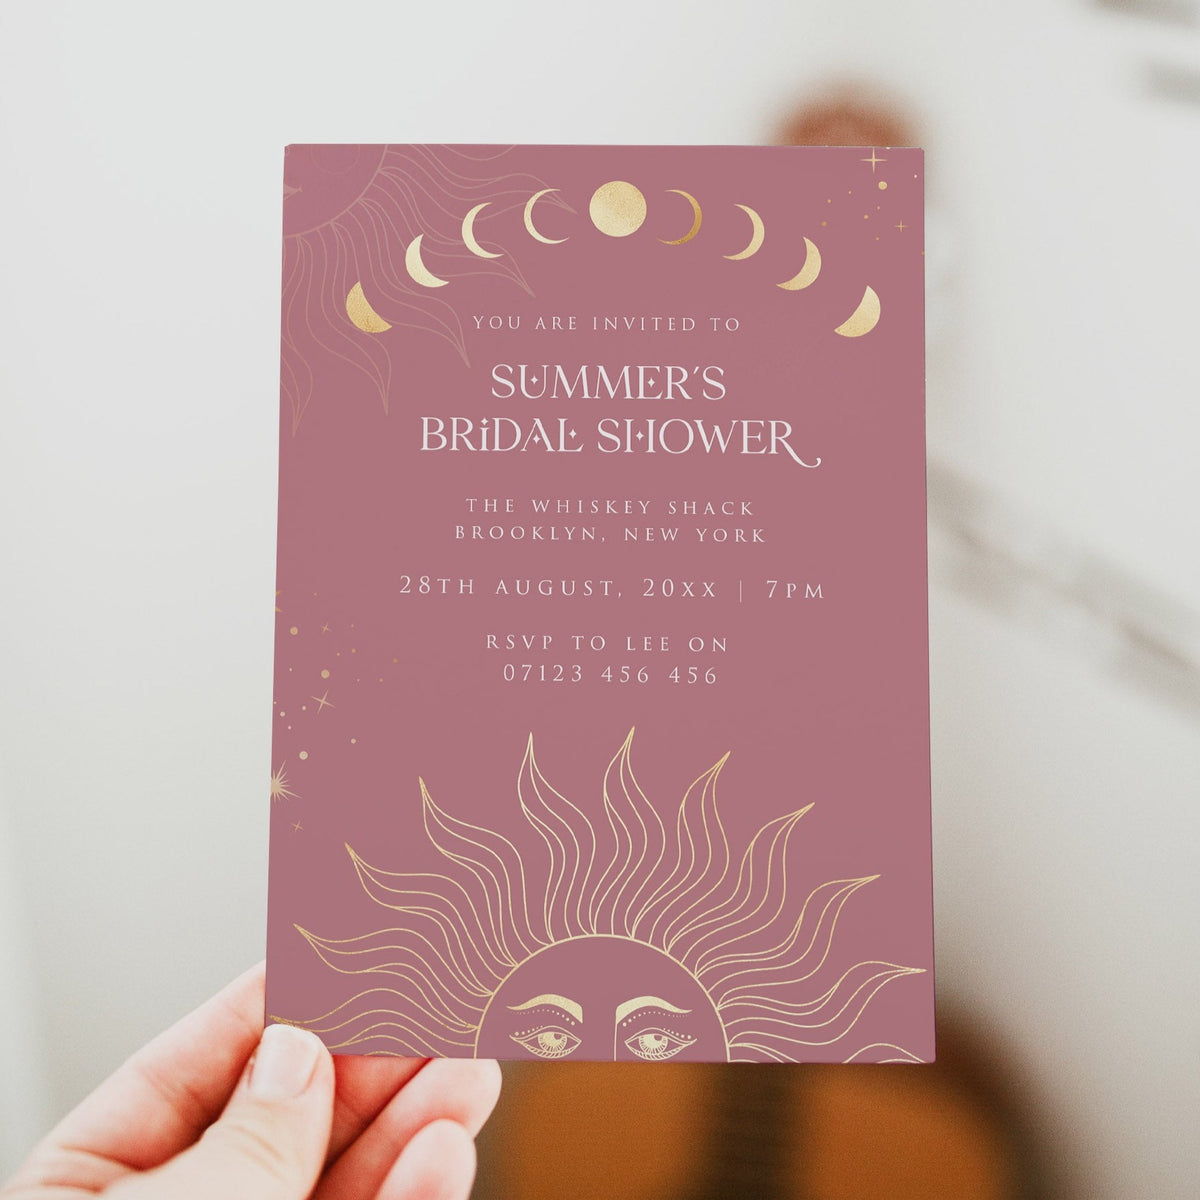 Fully editable and printable bridal shower invitation with a celestial design. Perfect for a celestial bridal shower themed party